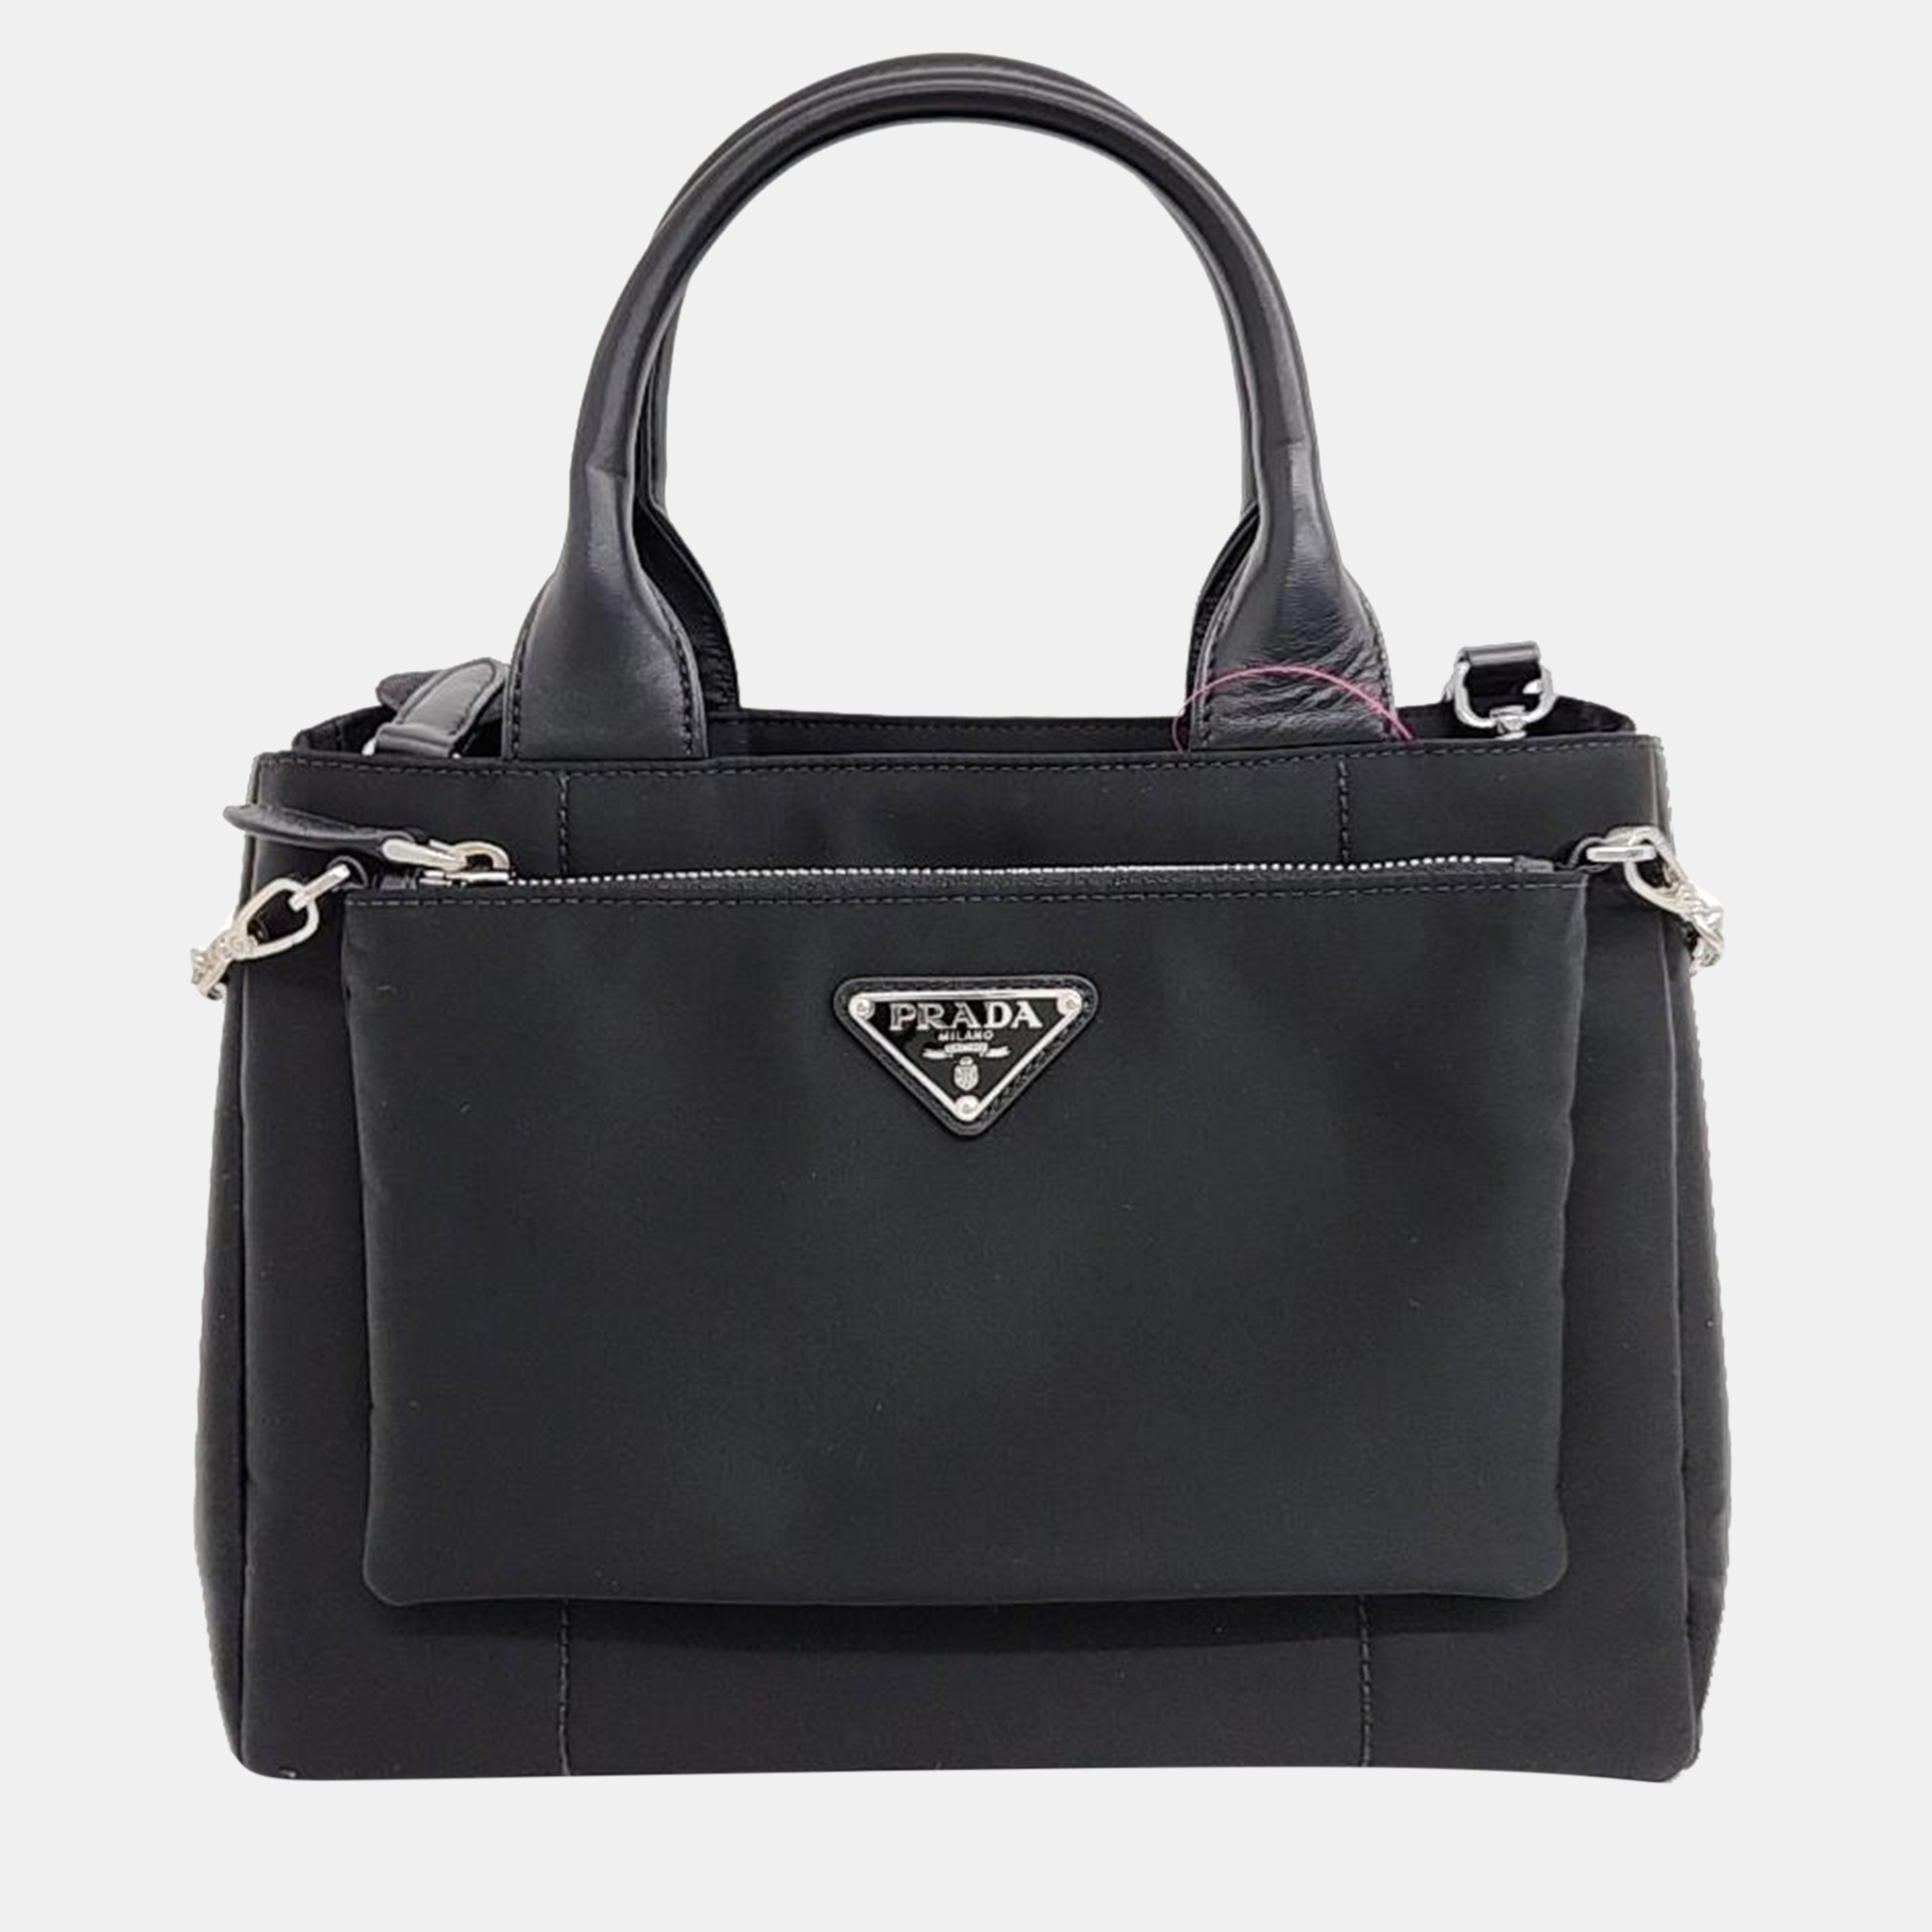 Crafted with precision this Prada shoulder bag combines luxurious materials with impeccable design ensuring you make a sophisticated statement wherever you go. Invest in it today.